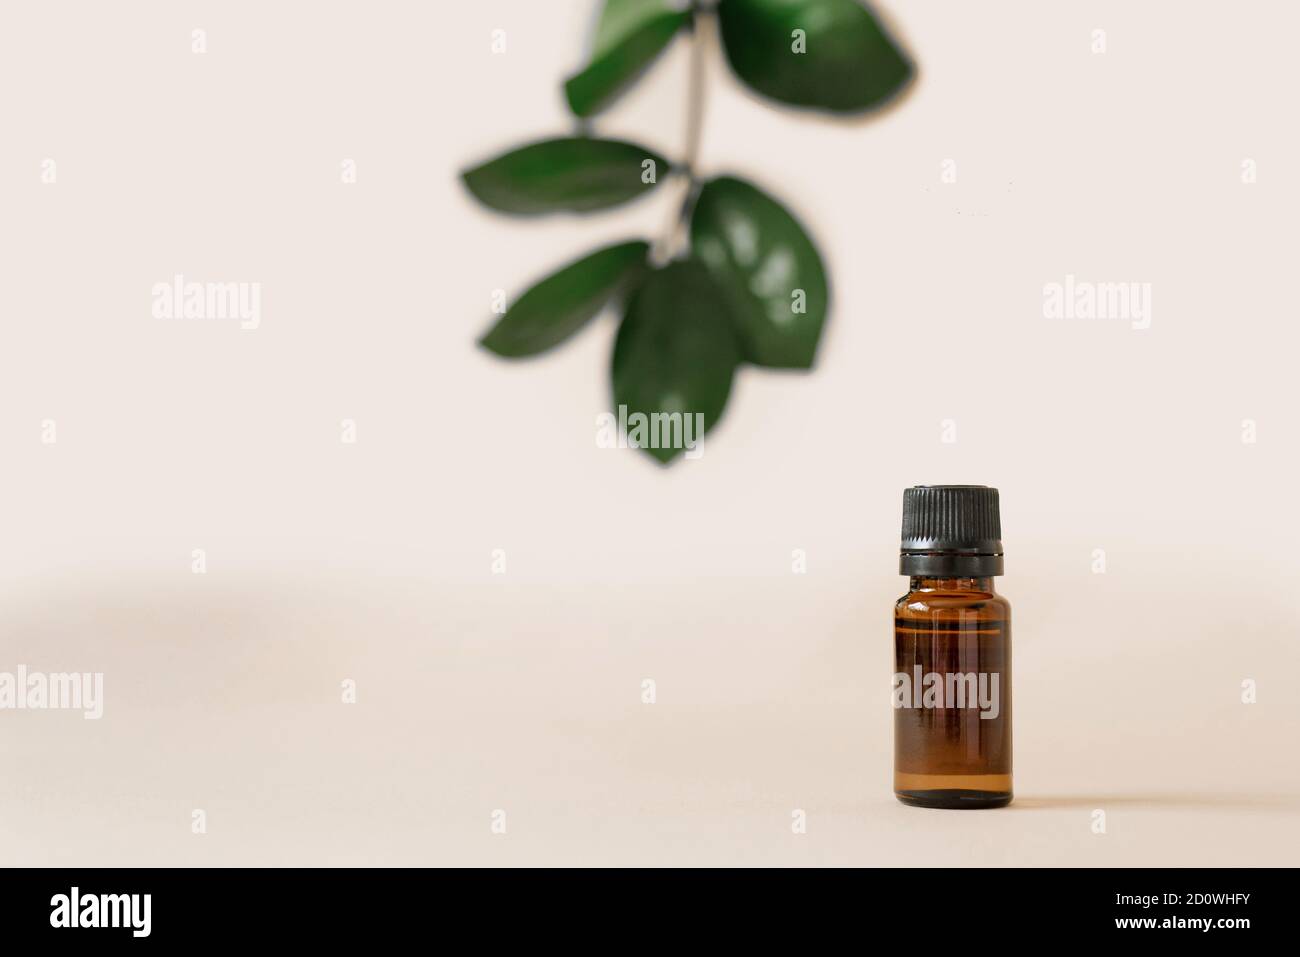 Vegetable cosmetics for body care in beauty salons. Bottle with aromatic natural oil on a beige background with green zamiokulkas leaves Stock Photo